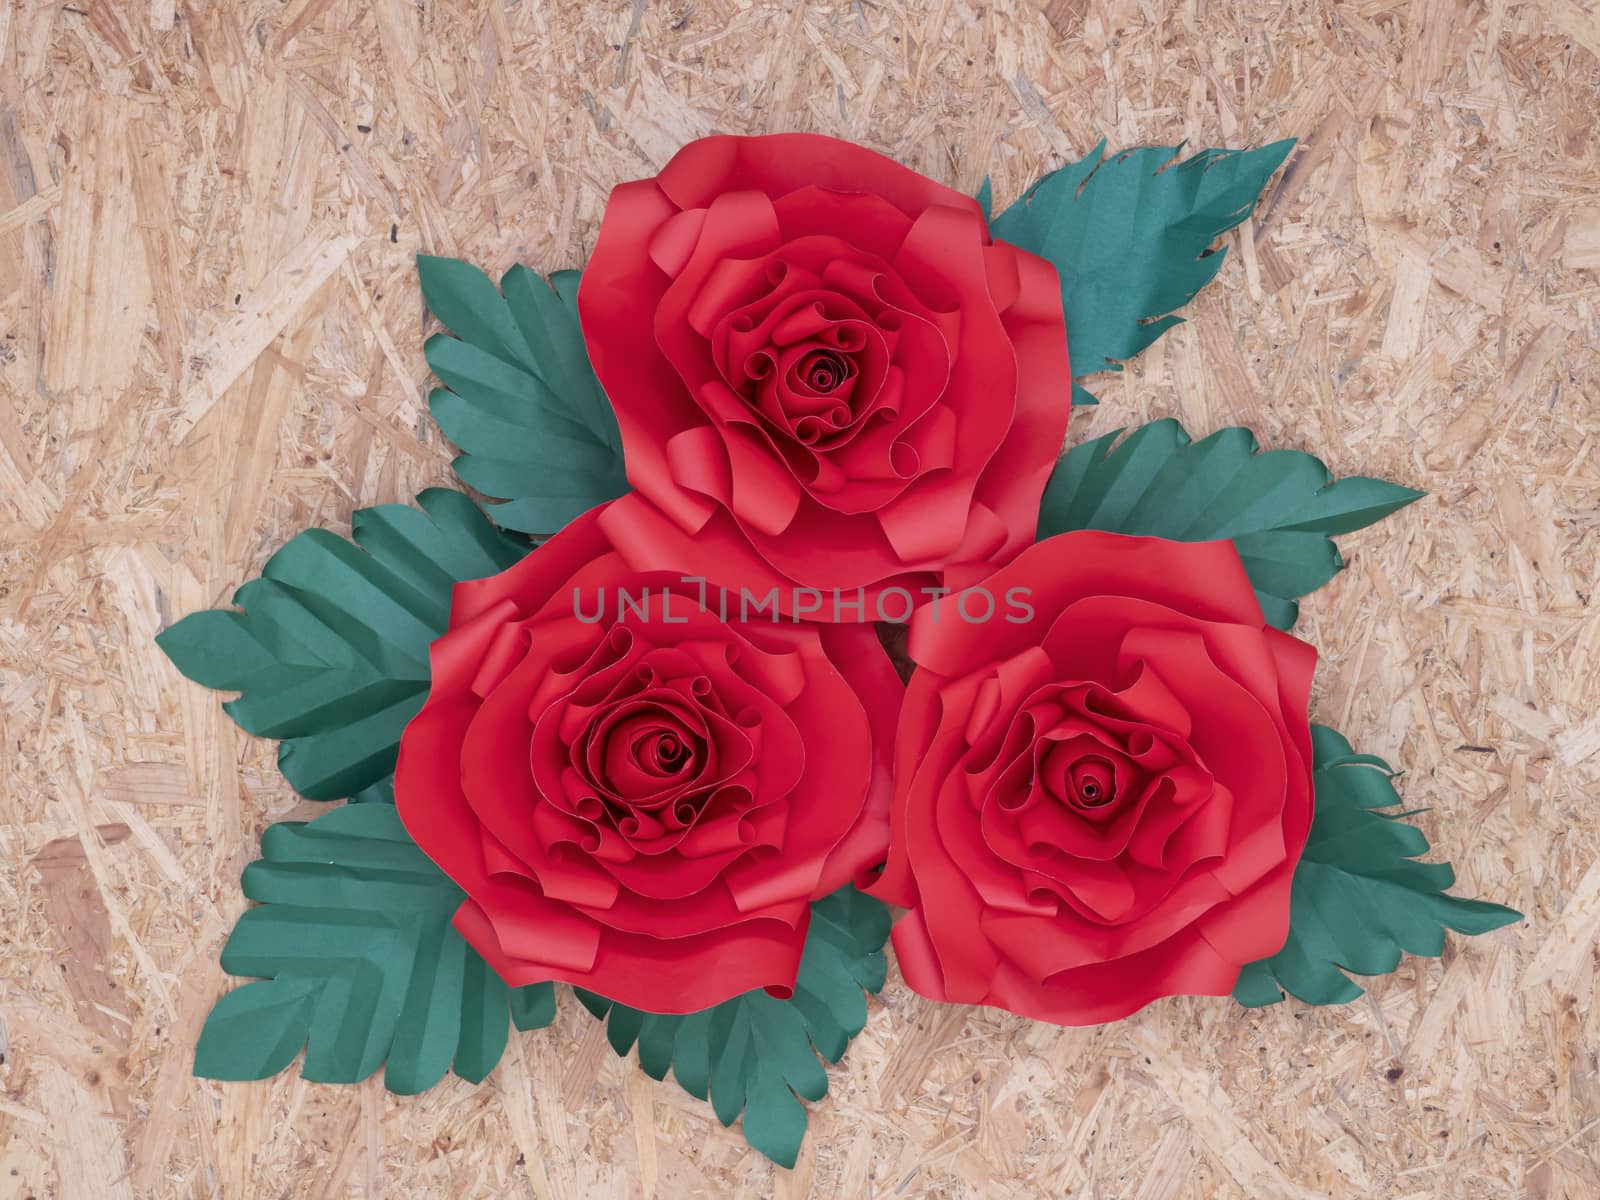 Beautiful hand-crafted paper crimson red roses with green leaves on vintage wooden board background.